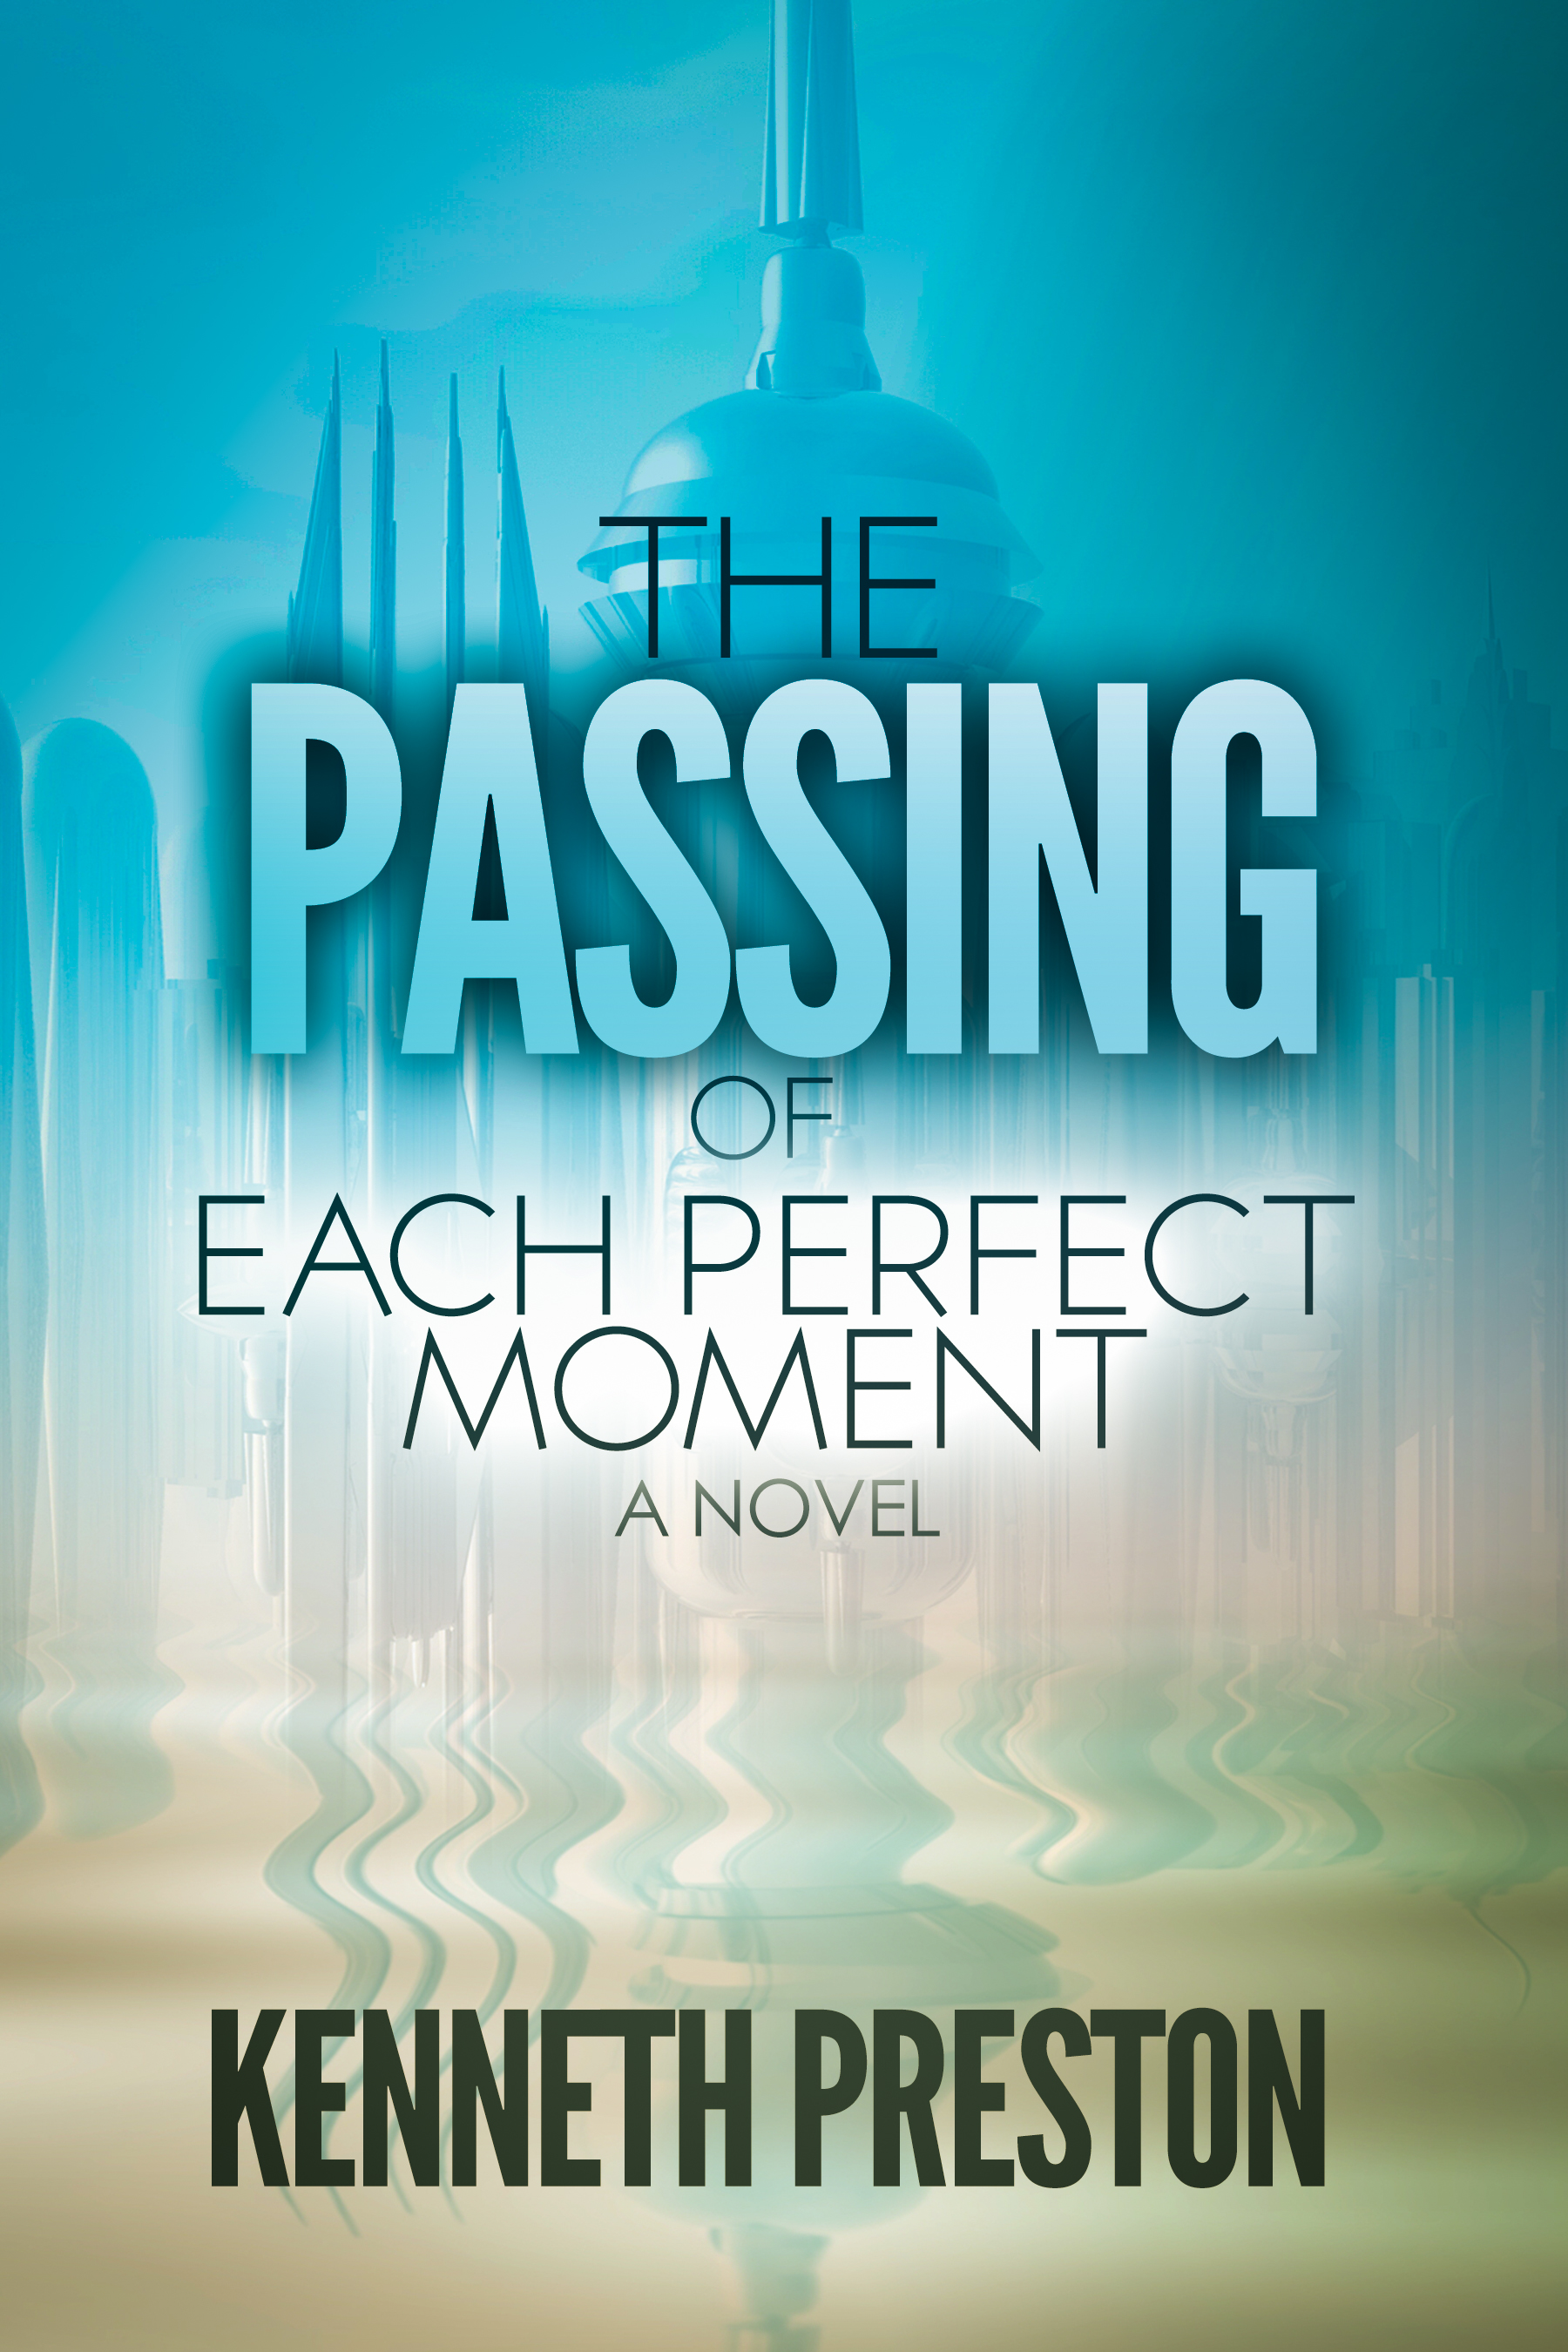 FREE: The Passing of Each Perfect Moment (The Perfect Moment Trilogy, Book 1) by Kenneth Preston